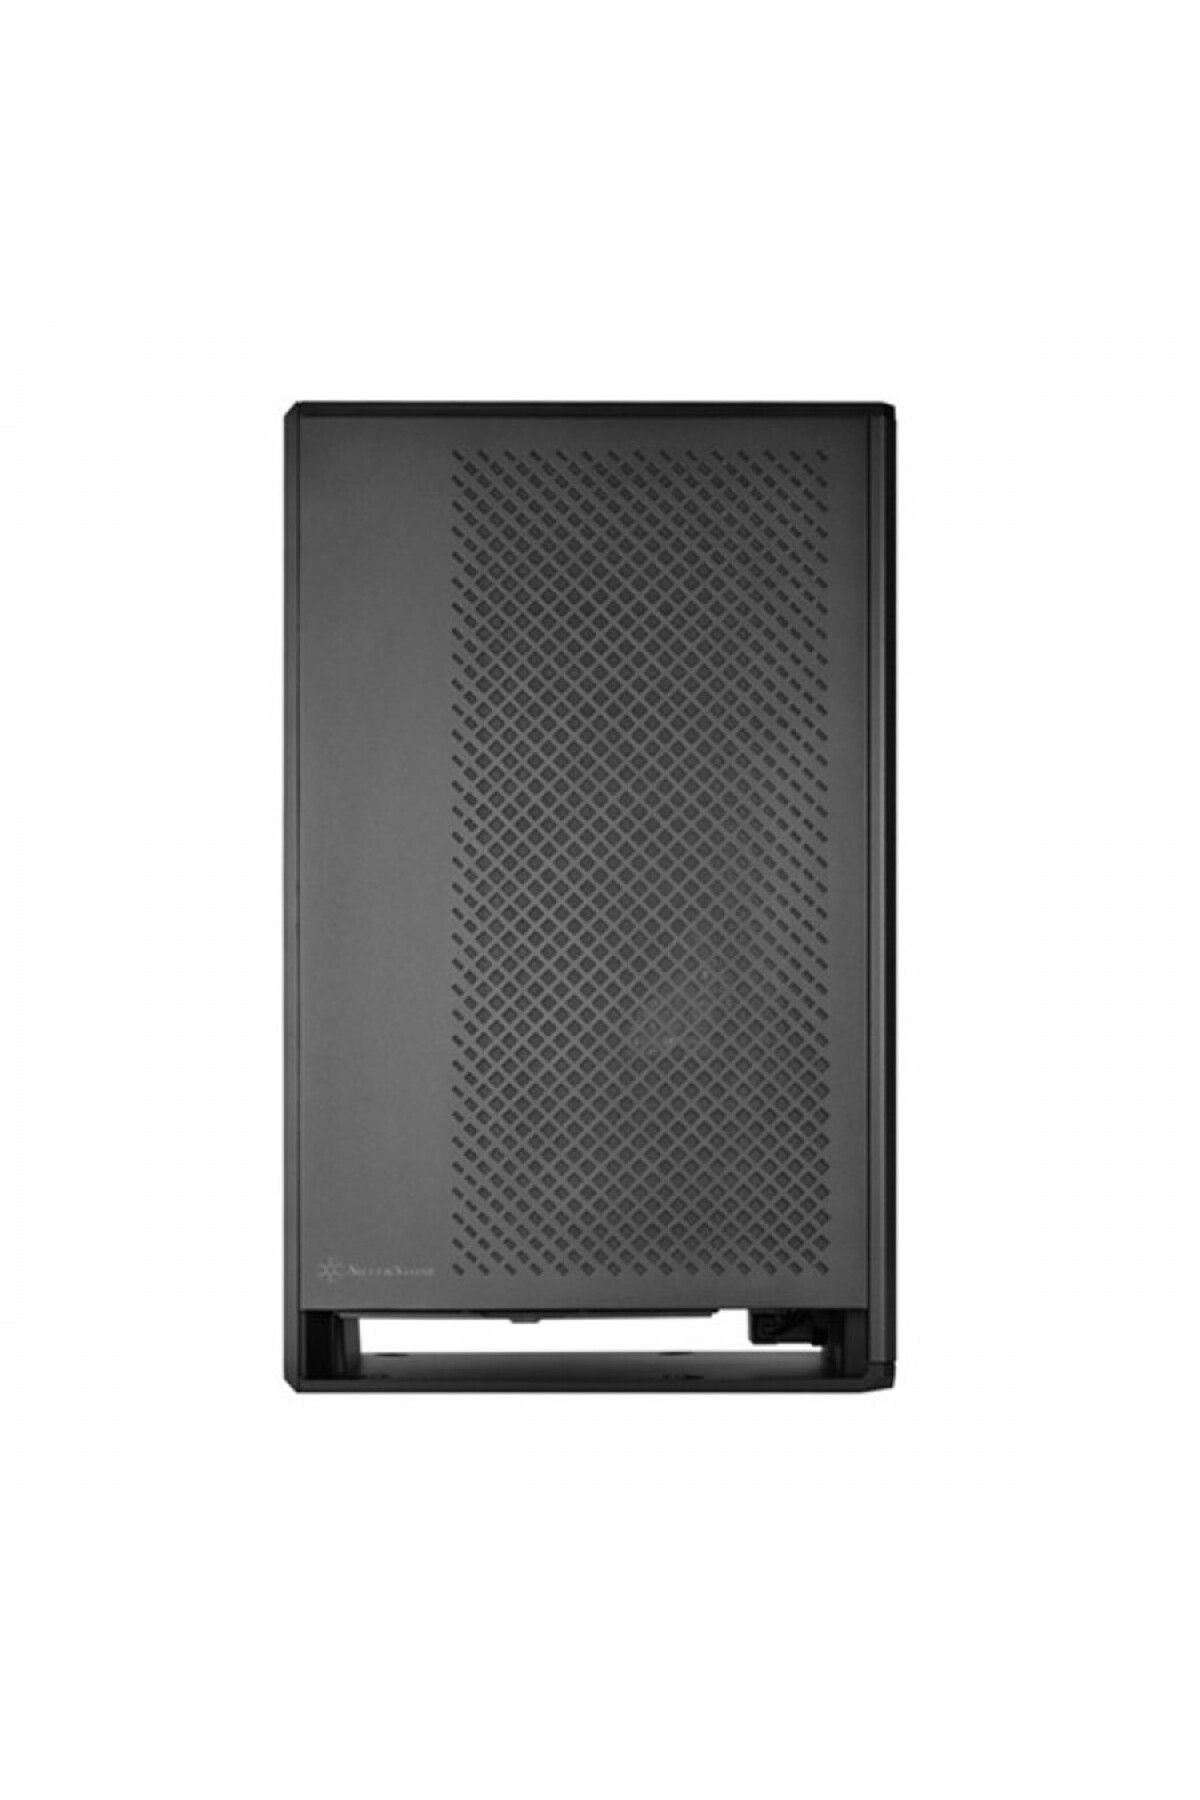 SilverStone ALTA G1M SST-ALG1MB GAMING MICRO-TOWER PC KASASI